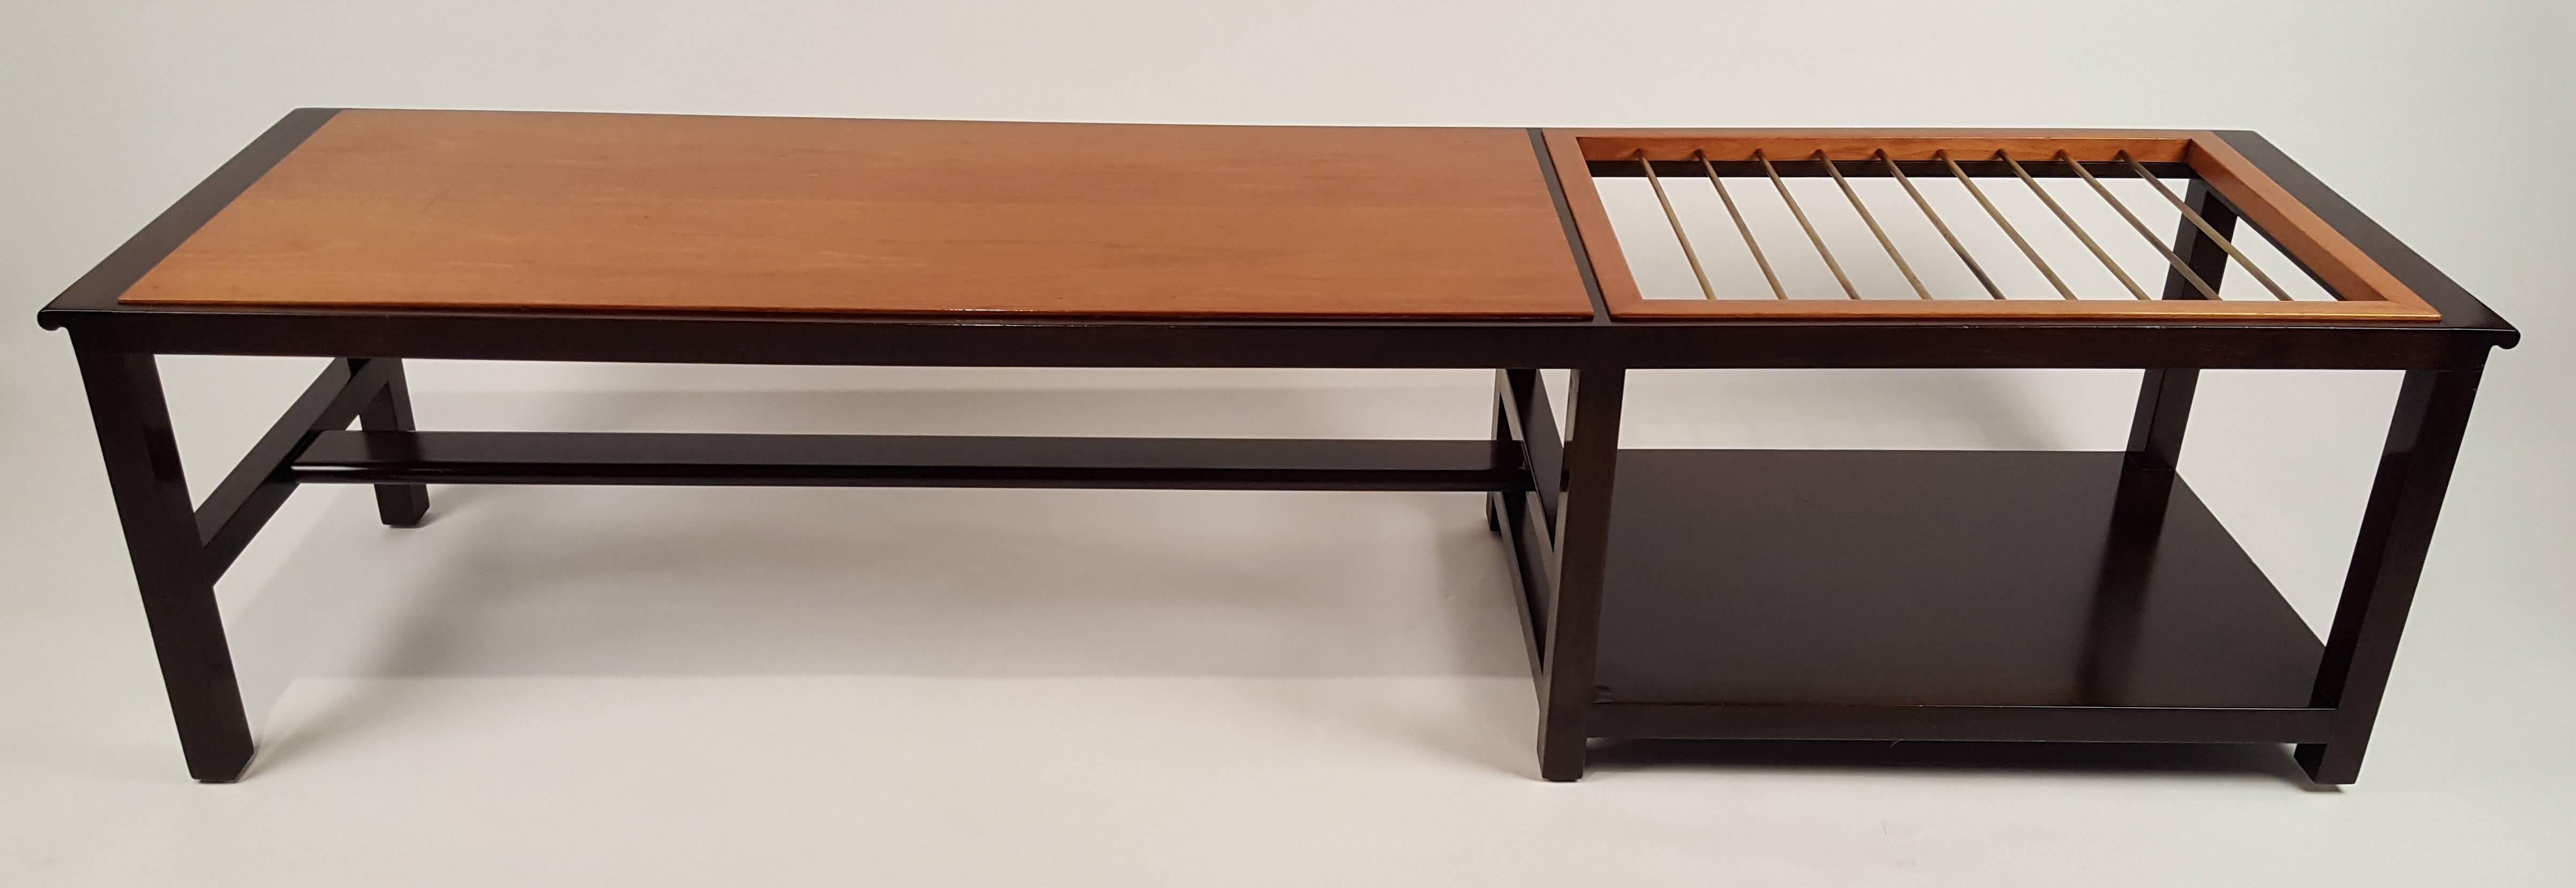 An exceptional Dunbar coffee table or bench (Model 5933a) with built-in brass rods for suspending magazines. Another option would be to recess a glass top over the rods to use as a surface for beverages. The rim and base are constructed of solid